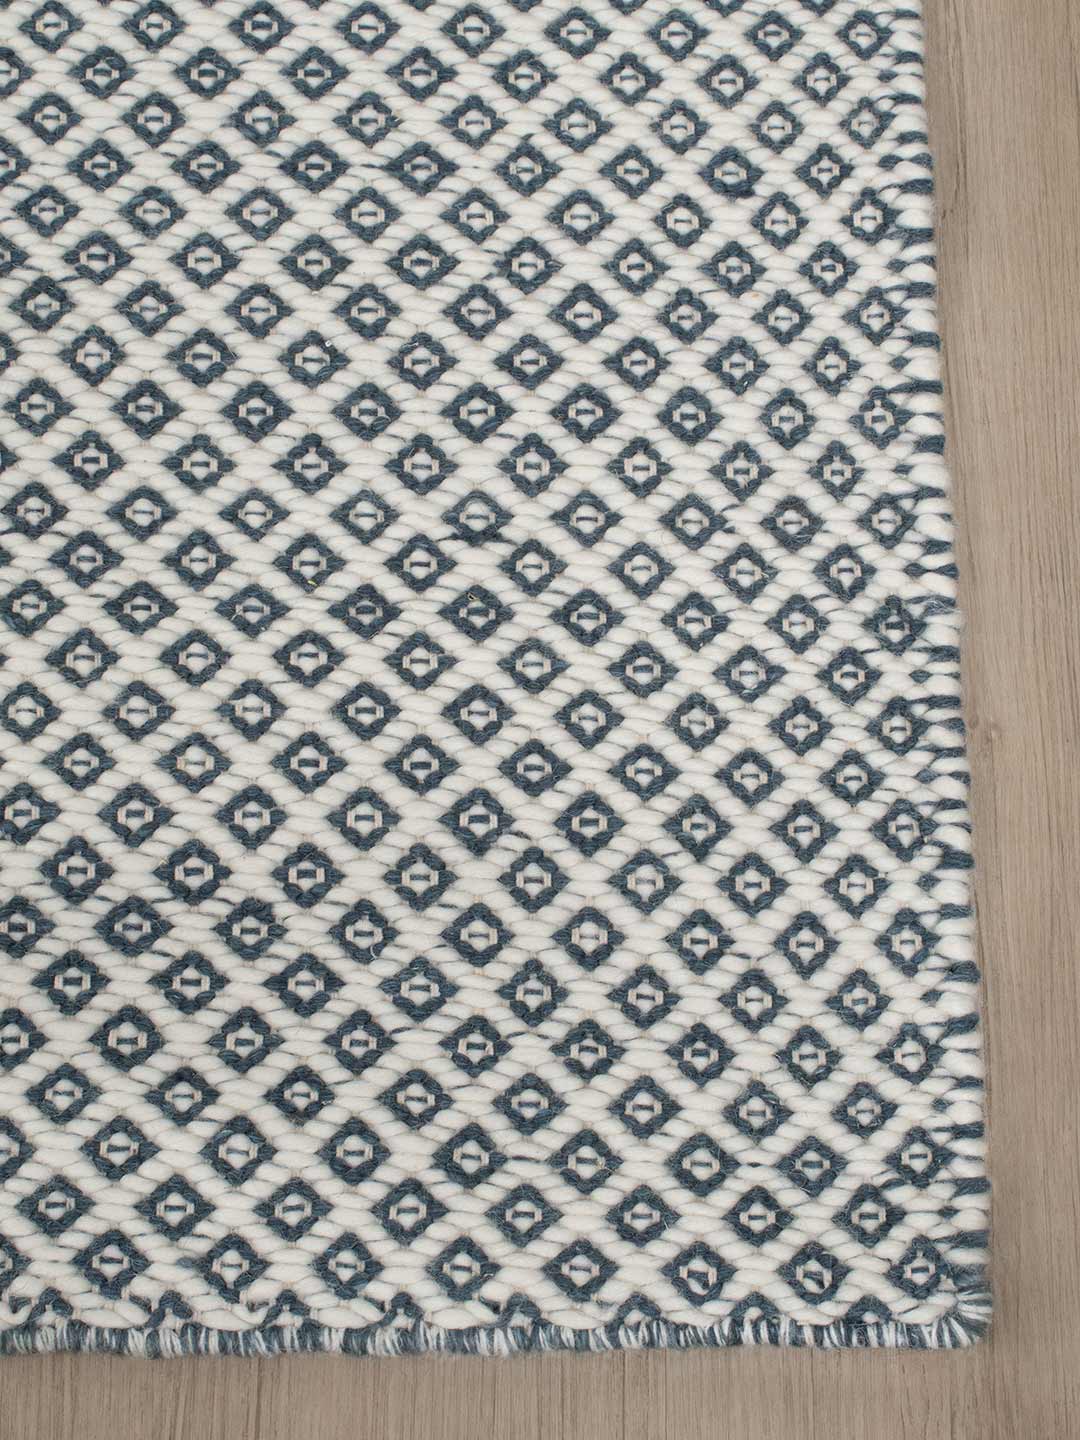 Rubick Blue Ivory Rug 20% off from the Rug Collection Stockist Make Your House A Home, Furniture Store Bendigo. Free Australia Wide Delivery